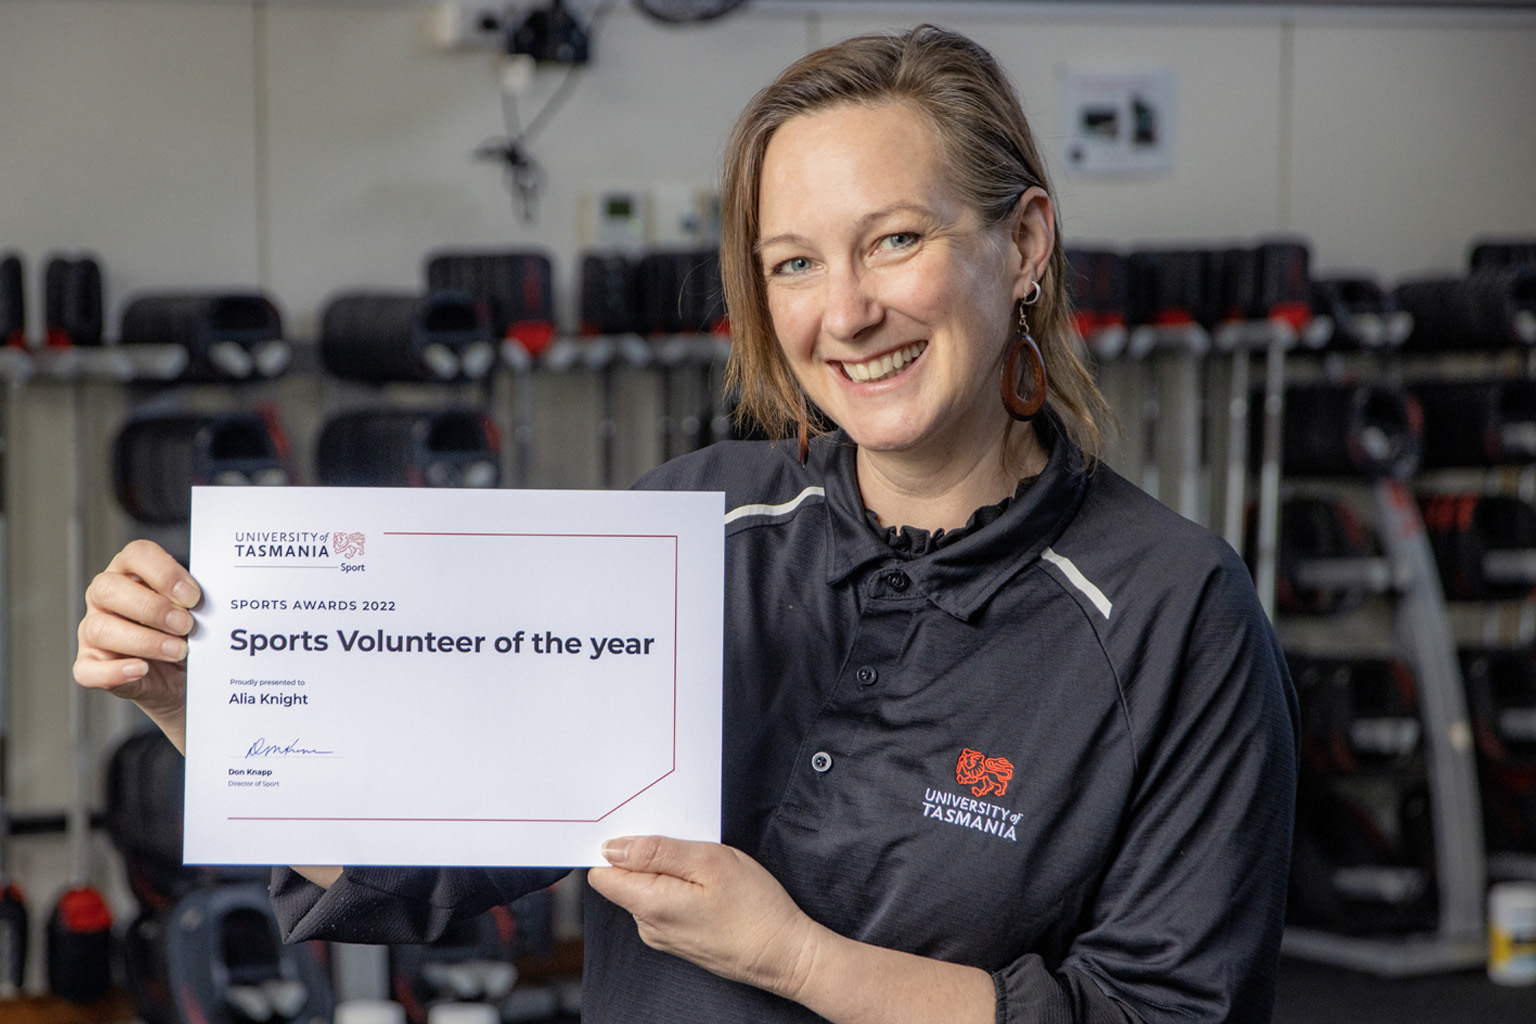 Alia Knight with a Sports Volunteer of the Year certificate from the University of Tasmania